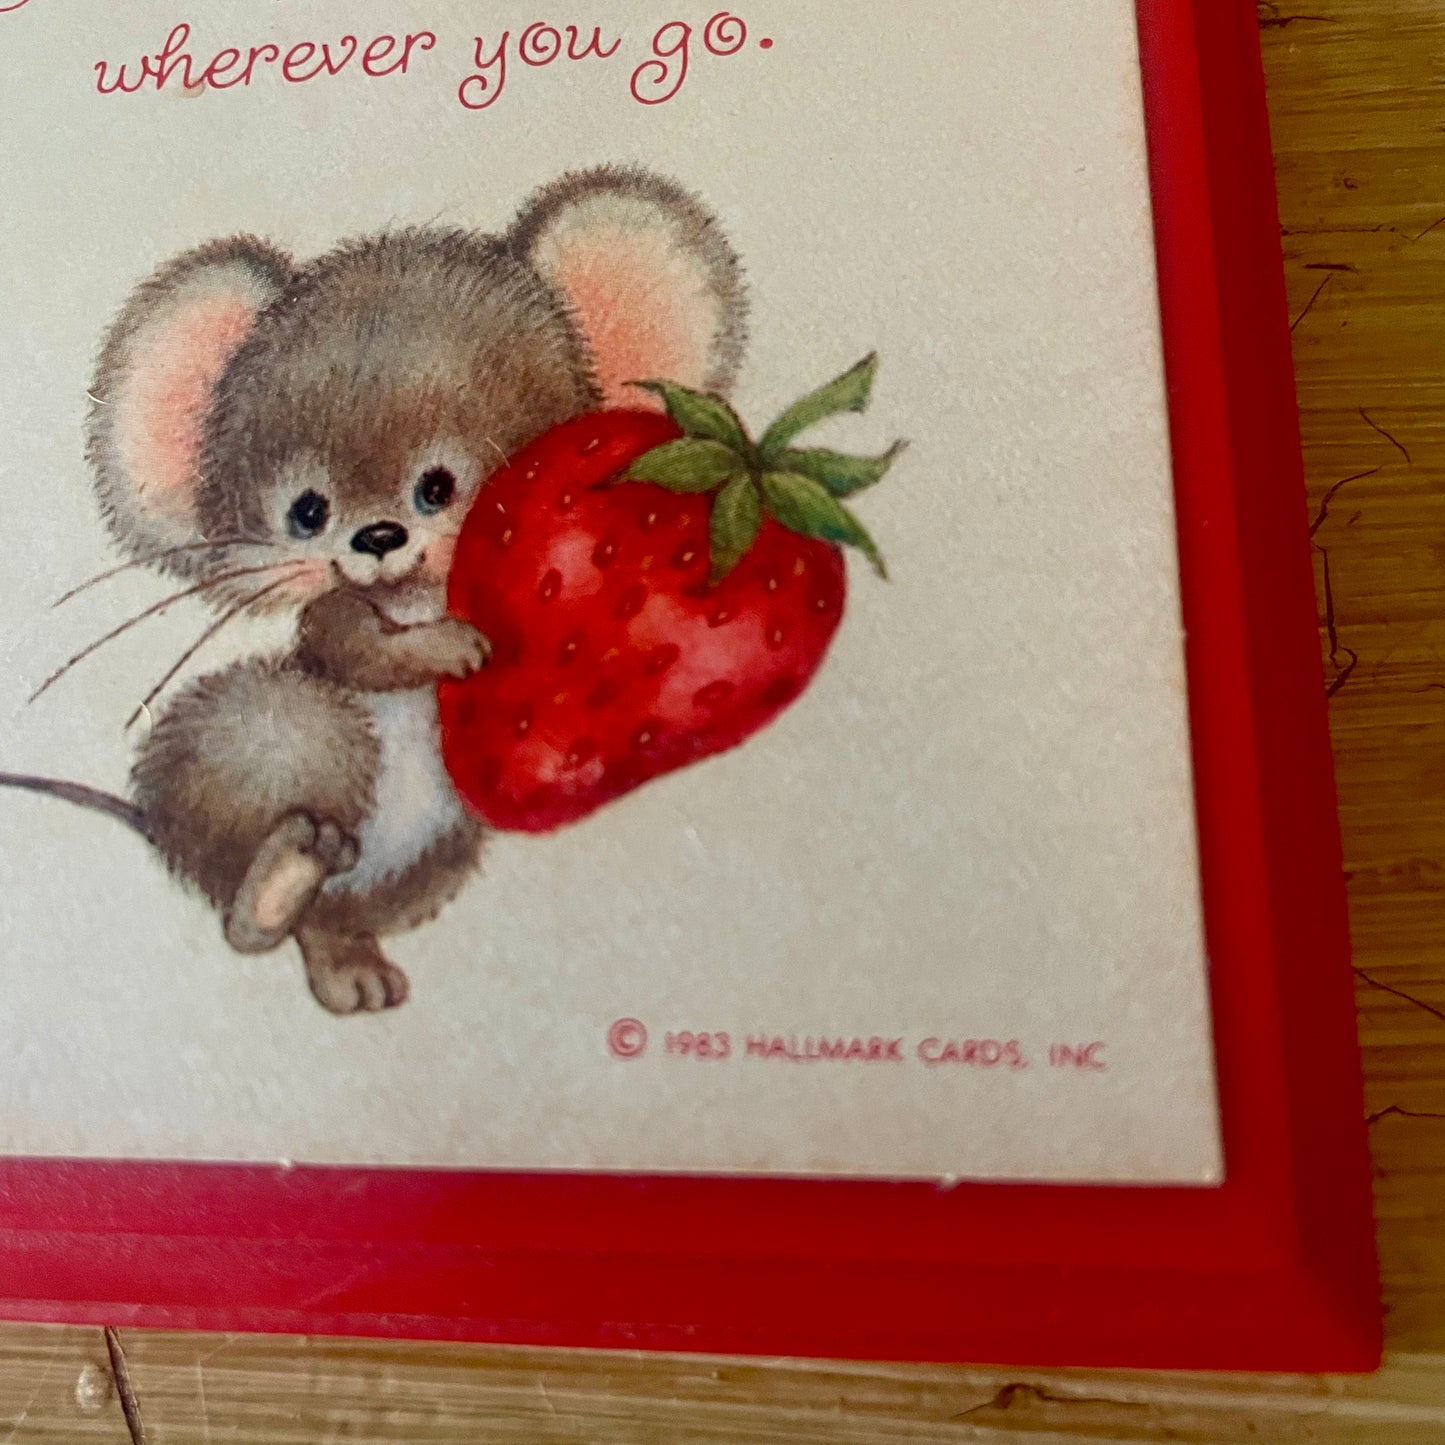 1983 Hallmark “Take Happiness with You” Strawberry Mouse Wall Plaque